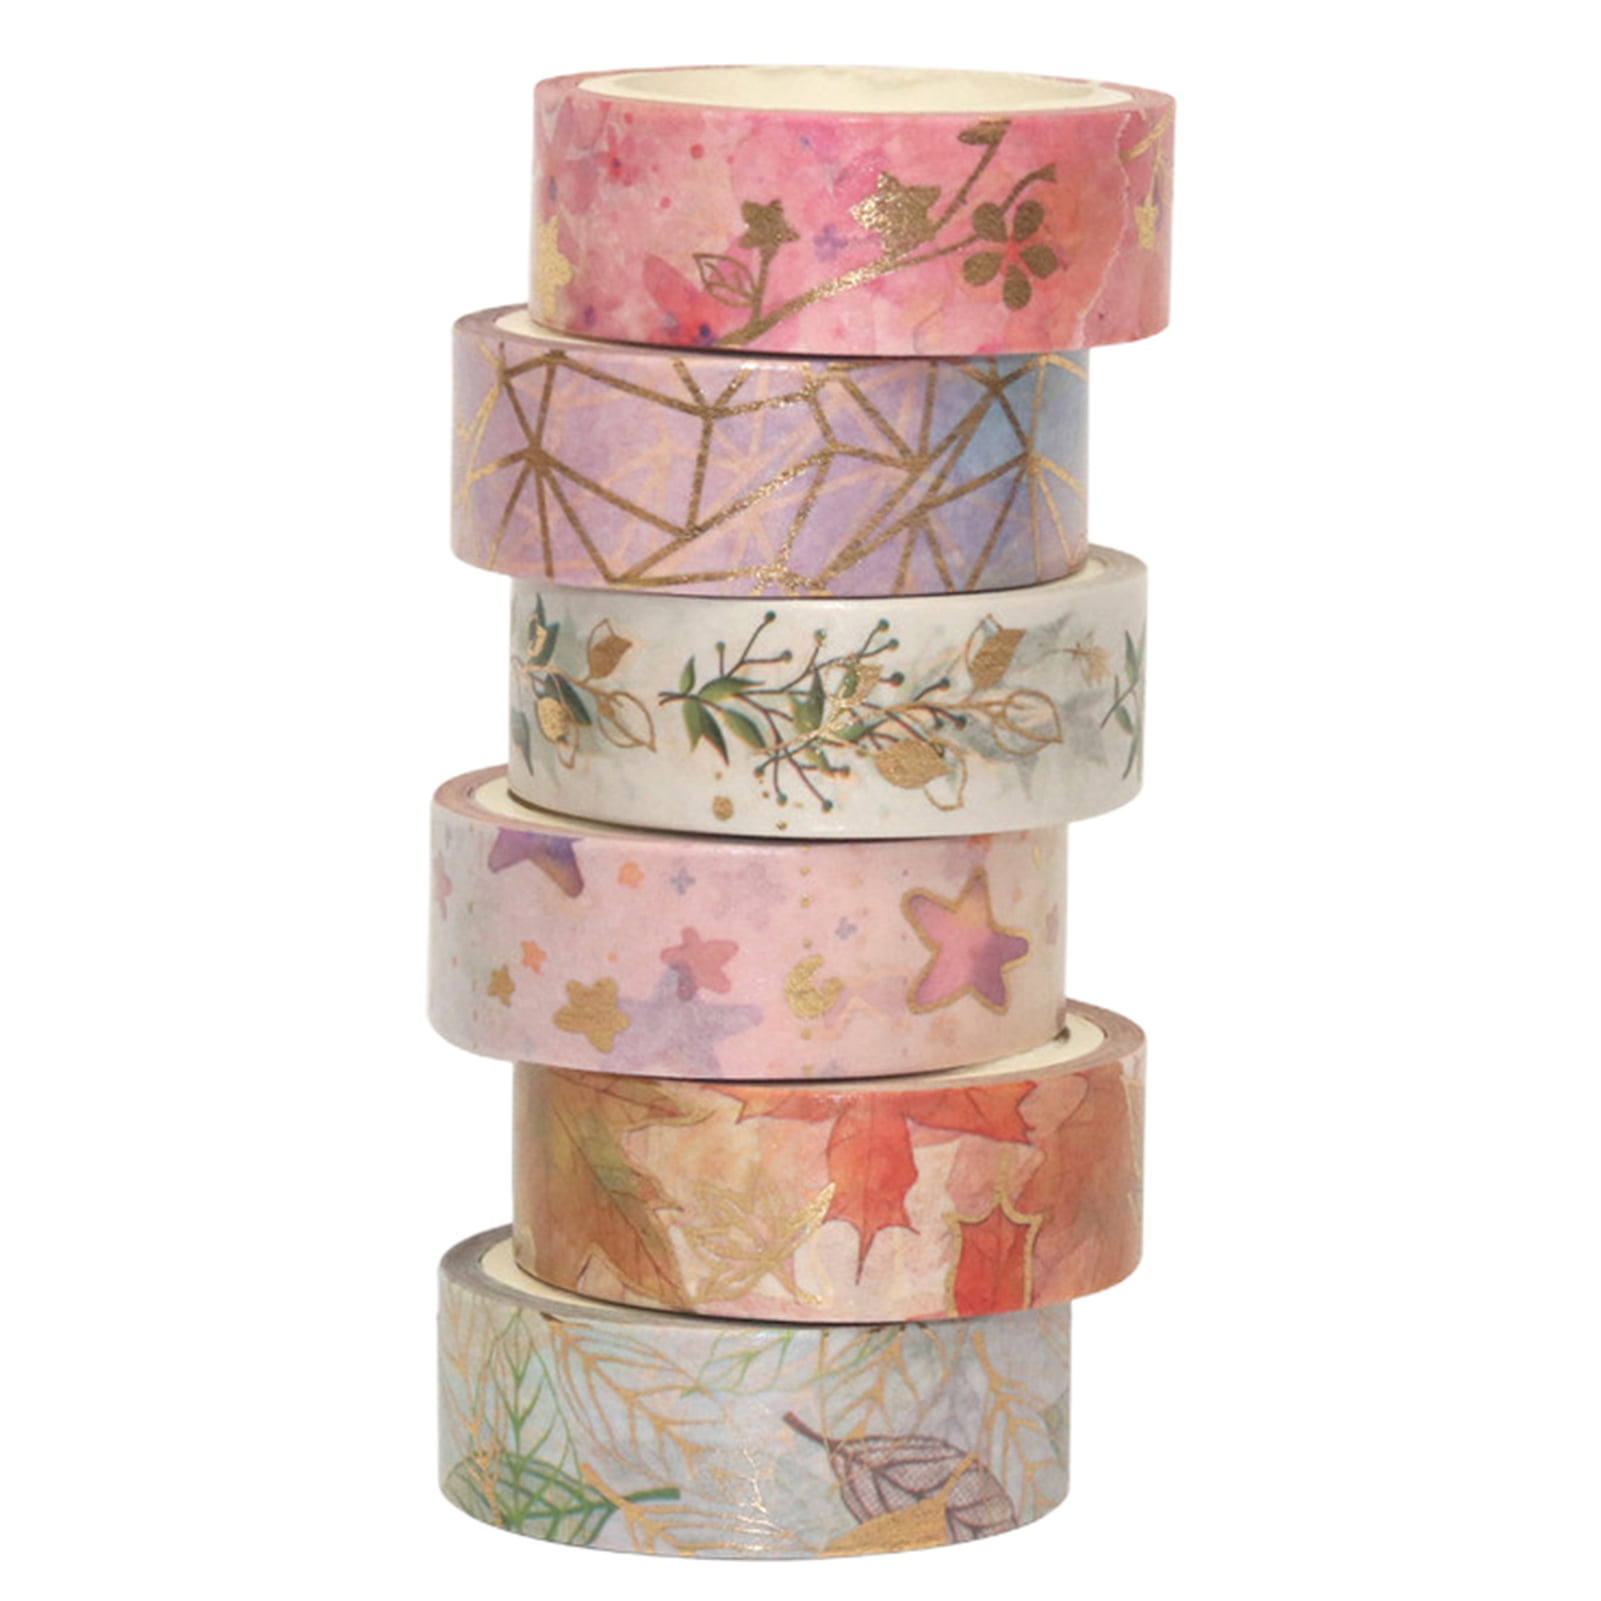 MAGICLULU 6 Rolls Winter Gold Foil Tape DIY Paper Tape Festive Decorative  Duct Tape Decoration Washi Tape Christmas Gift Wrapping Tape White Washi